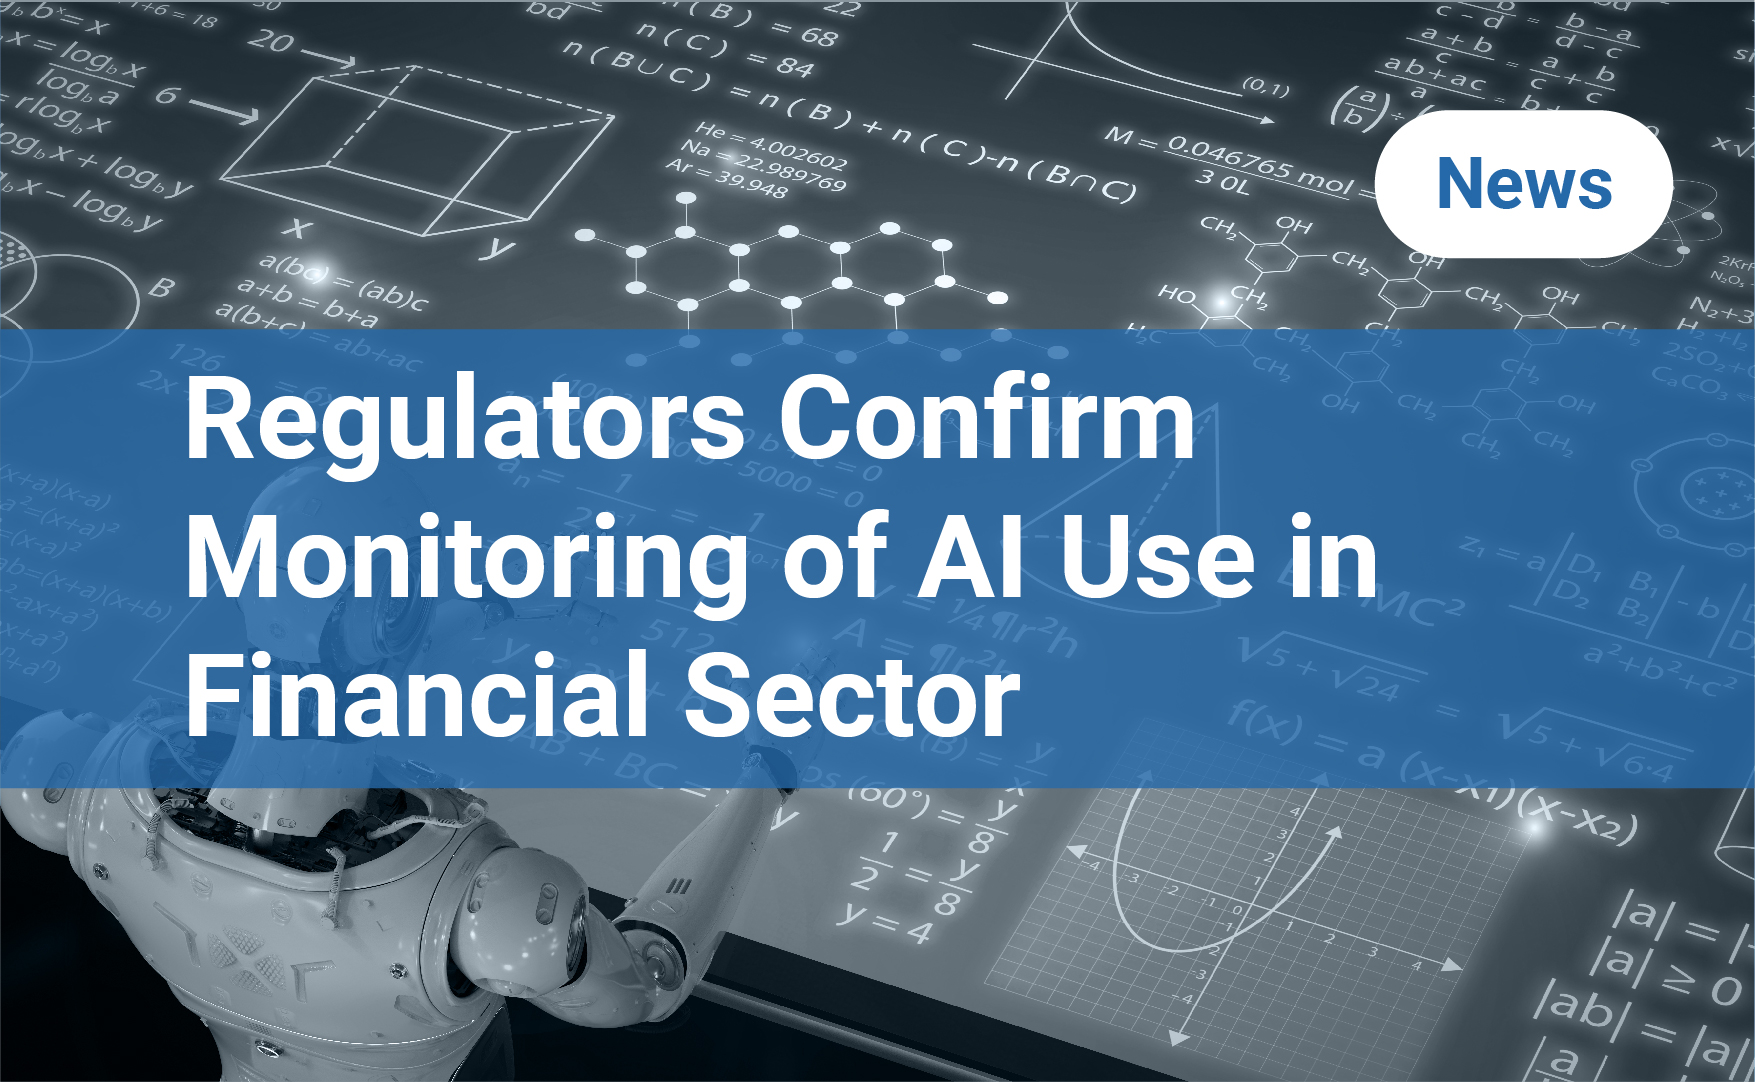 Regulators Confirm Monitoring of AI Use in Financial Sector